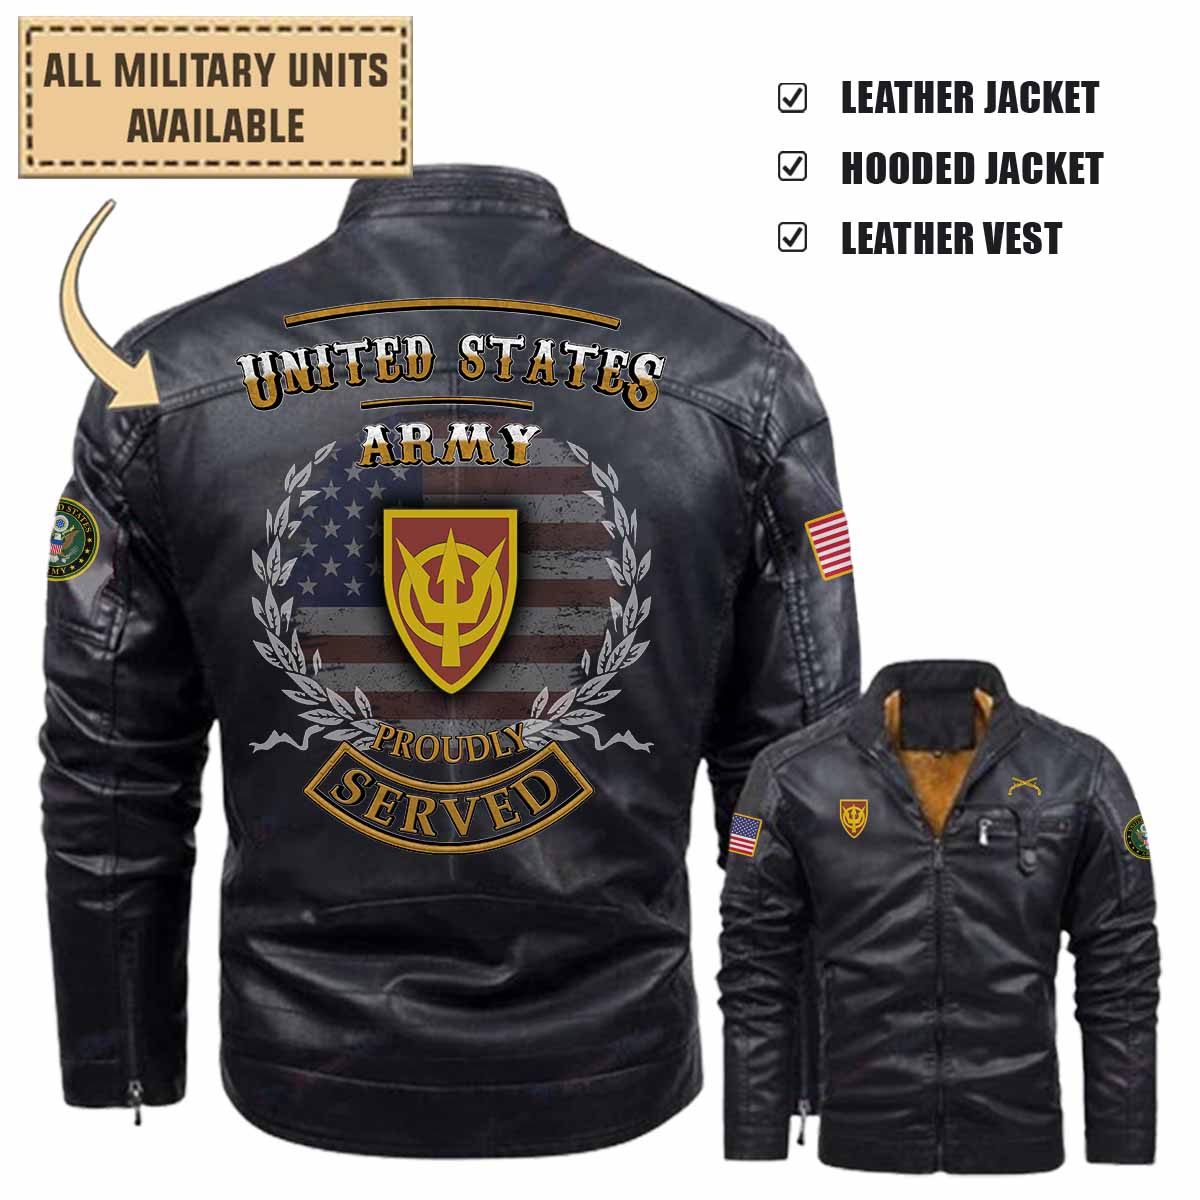 570th MP Railway Platoon_Military Leather Jacket and Vest